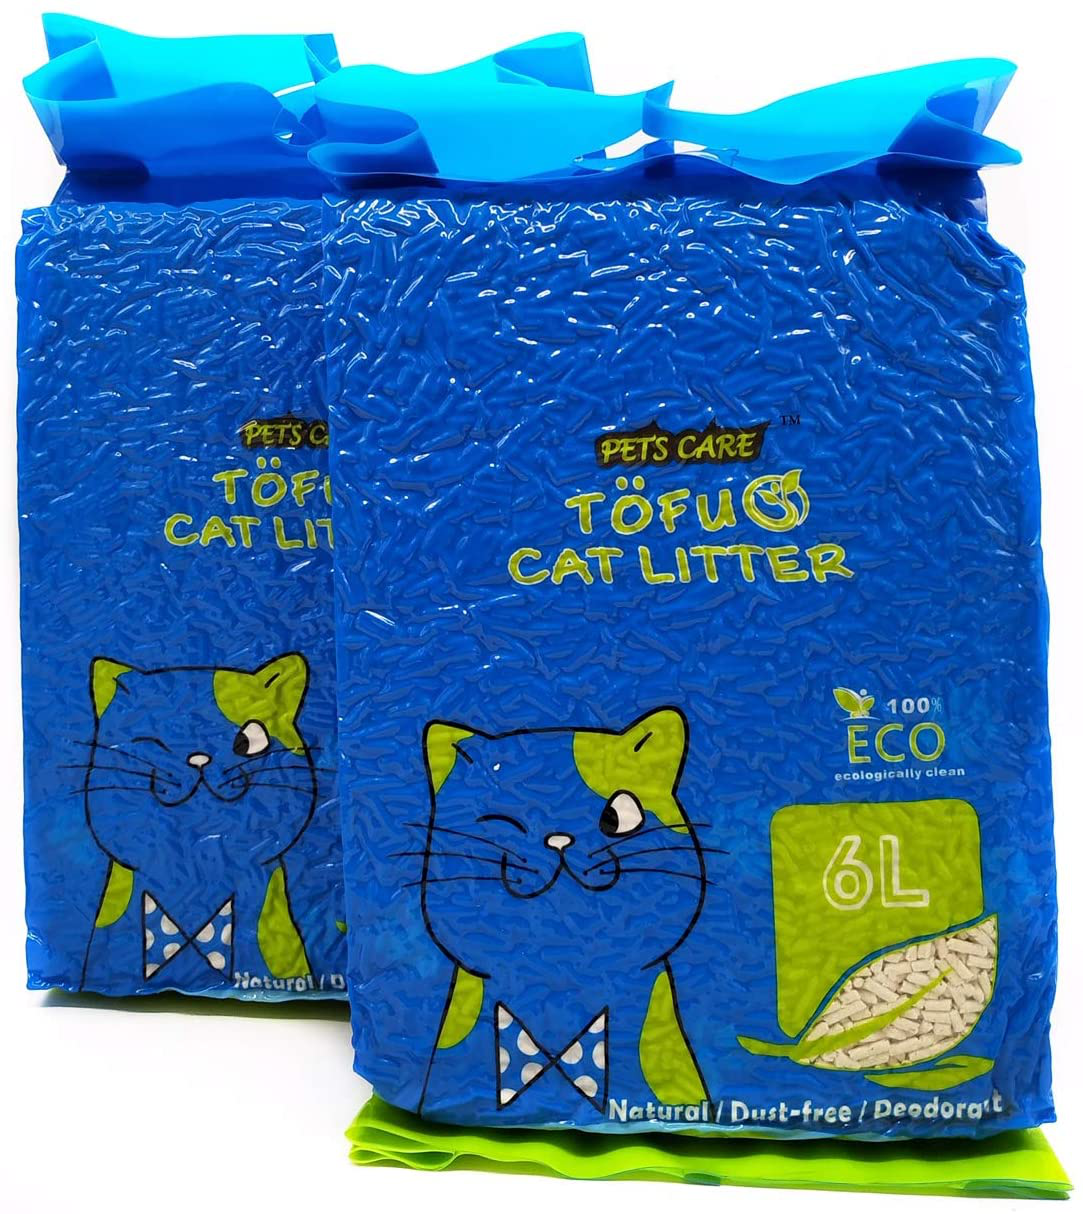 PETS CARE TOFU CAT Litter, Two Bags, 12 LBS.